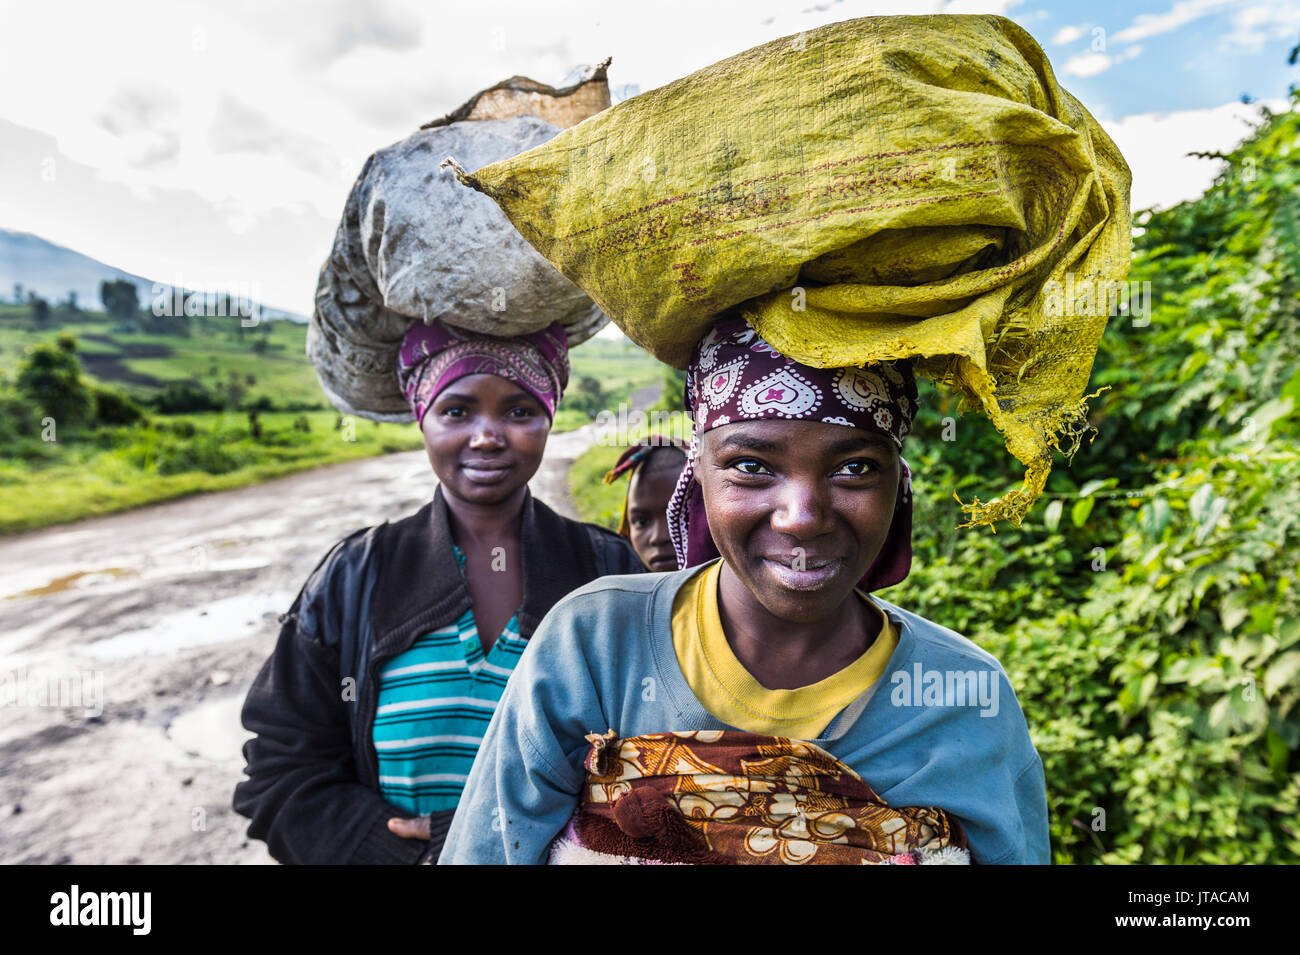 Local women carrying goods on their heads, Virunga National Park, Democratic Republic of the Congo, Africa Stock Photo